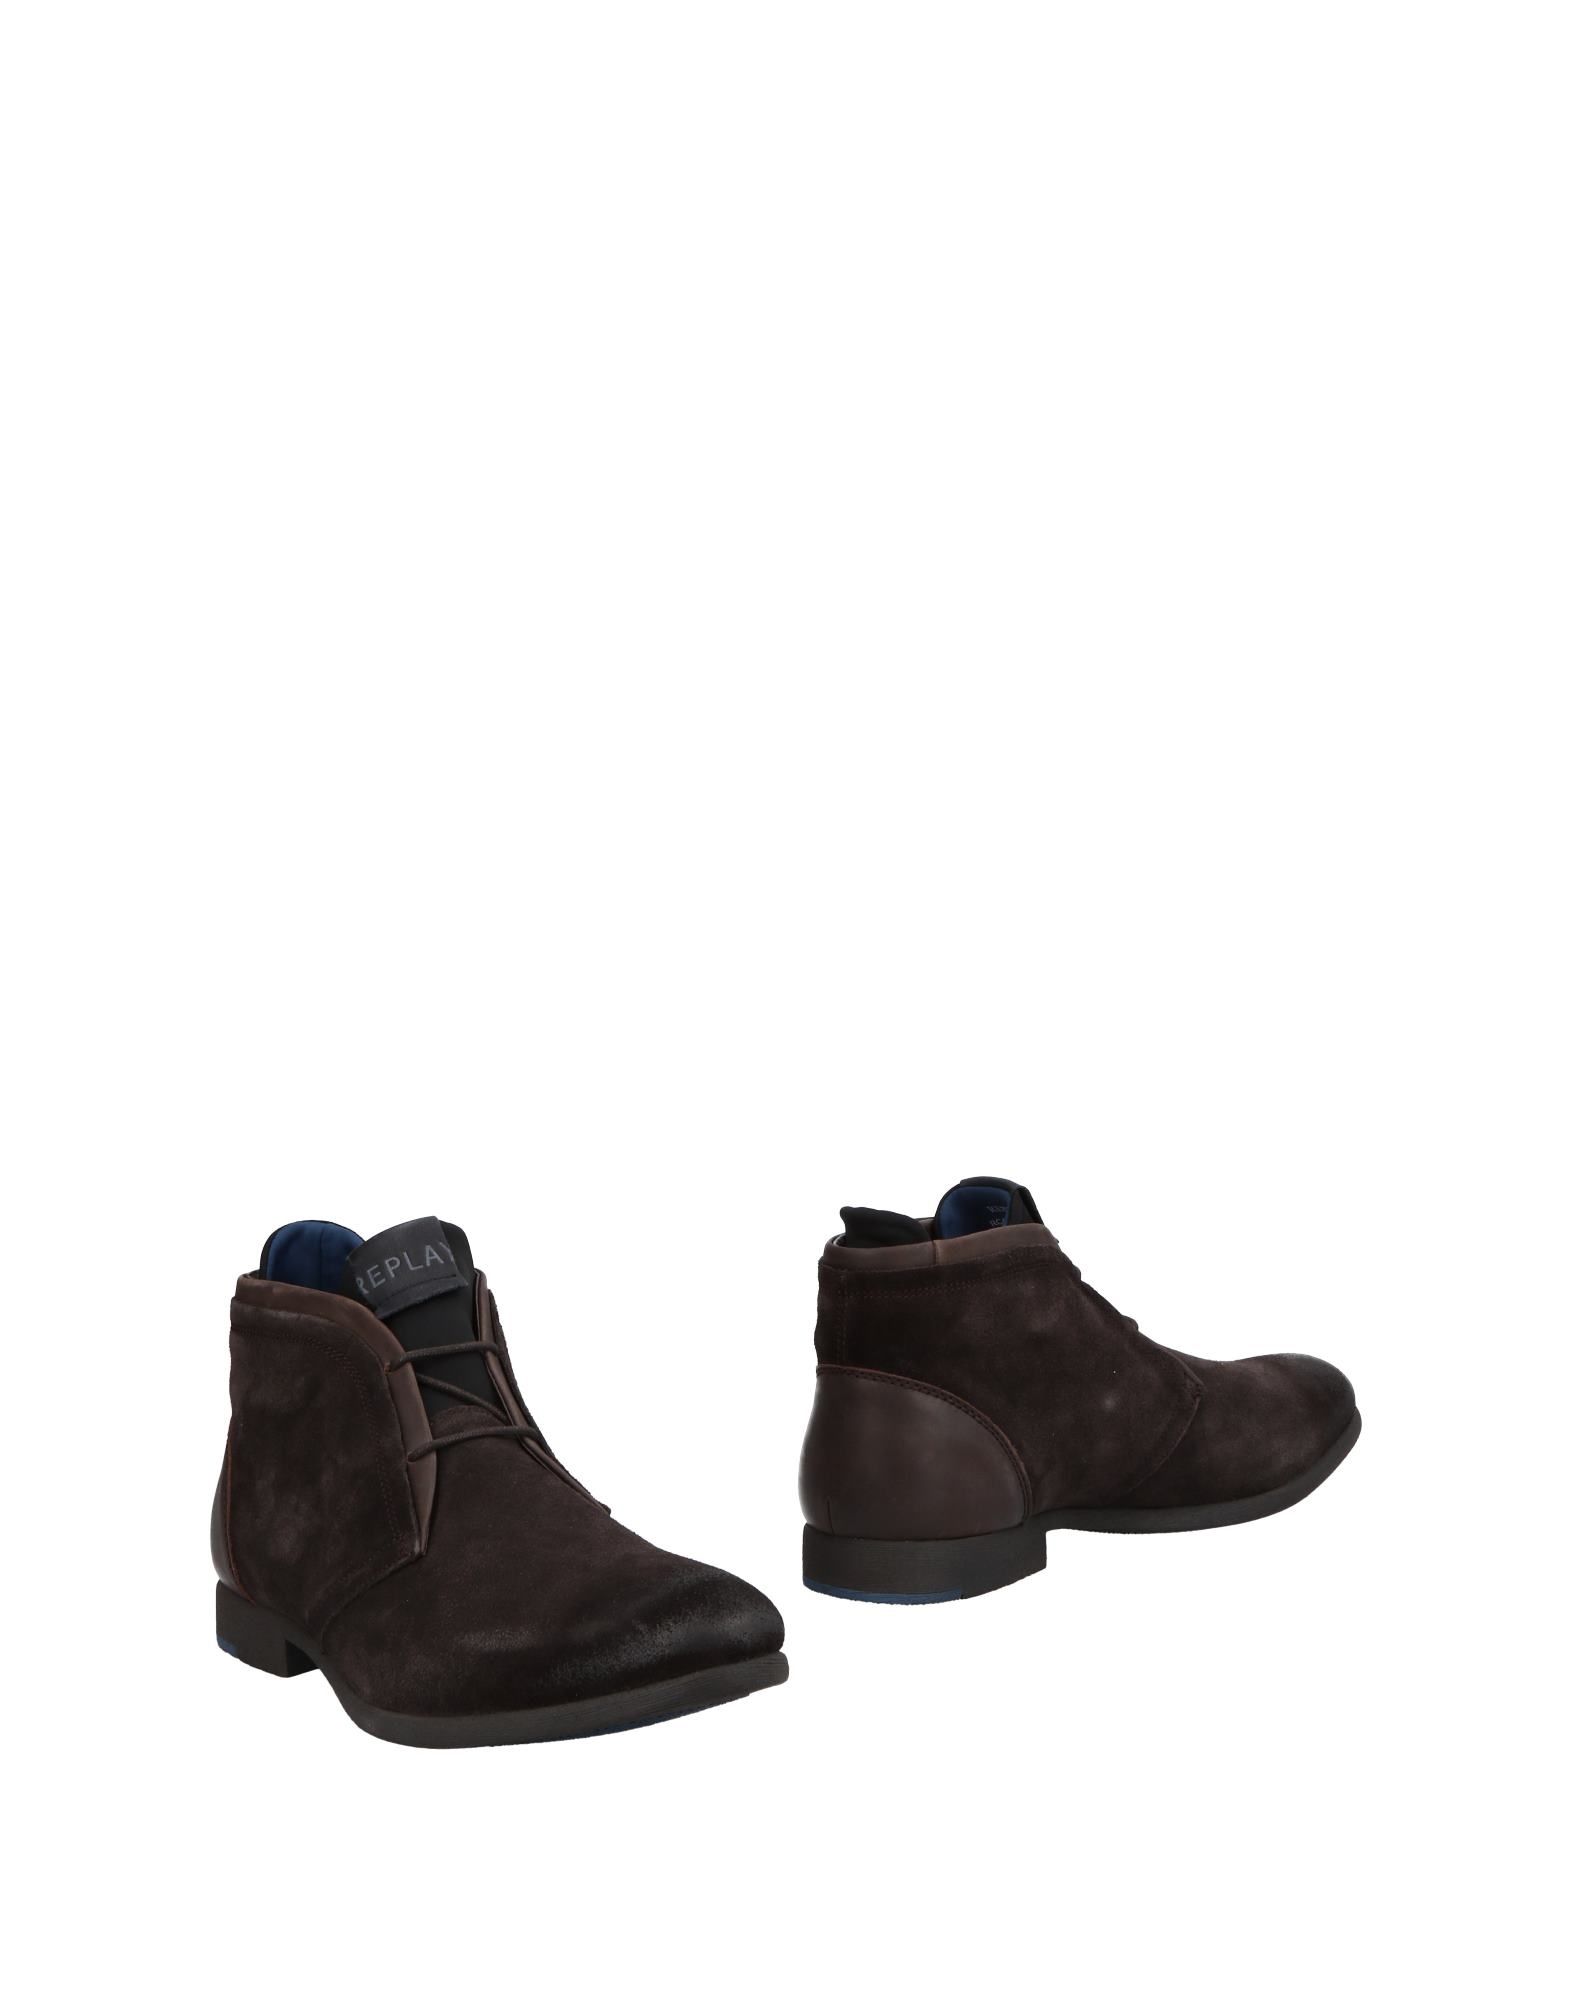 Replay Boots In Dark Brown